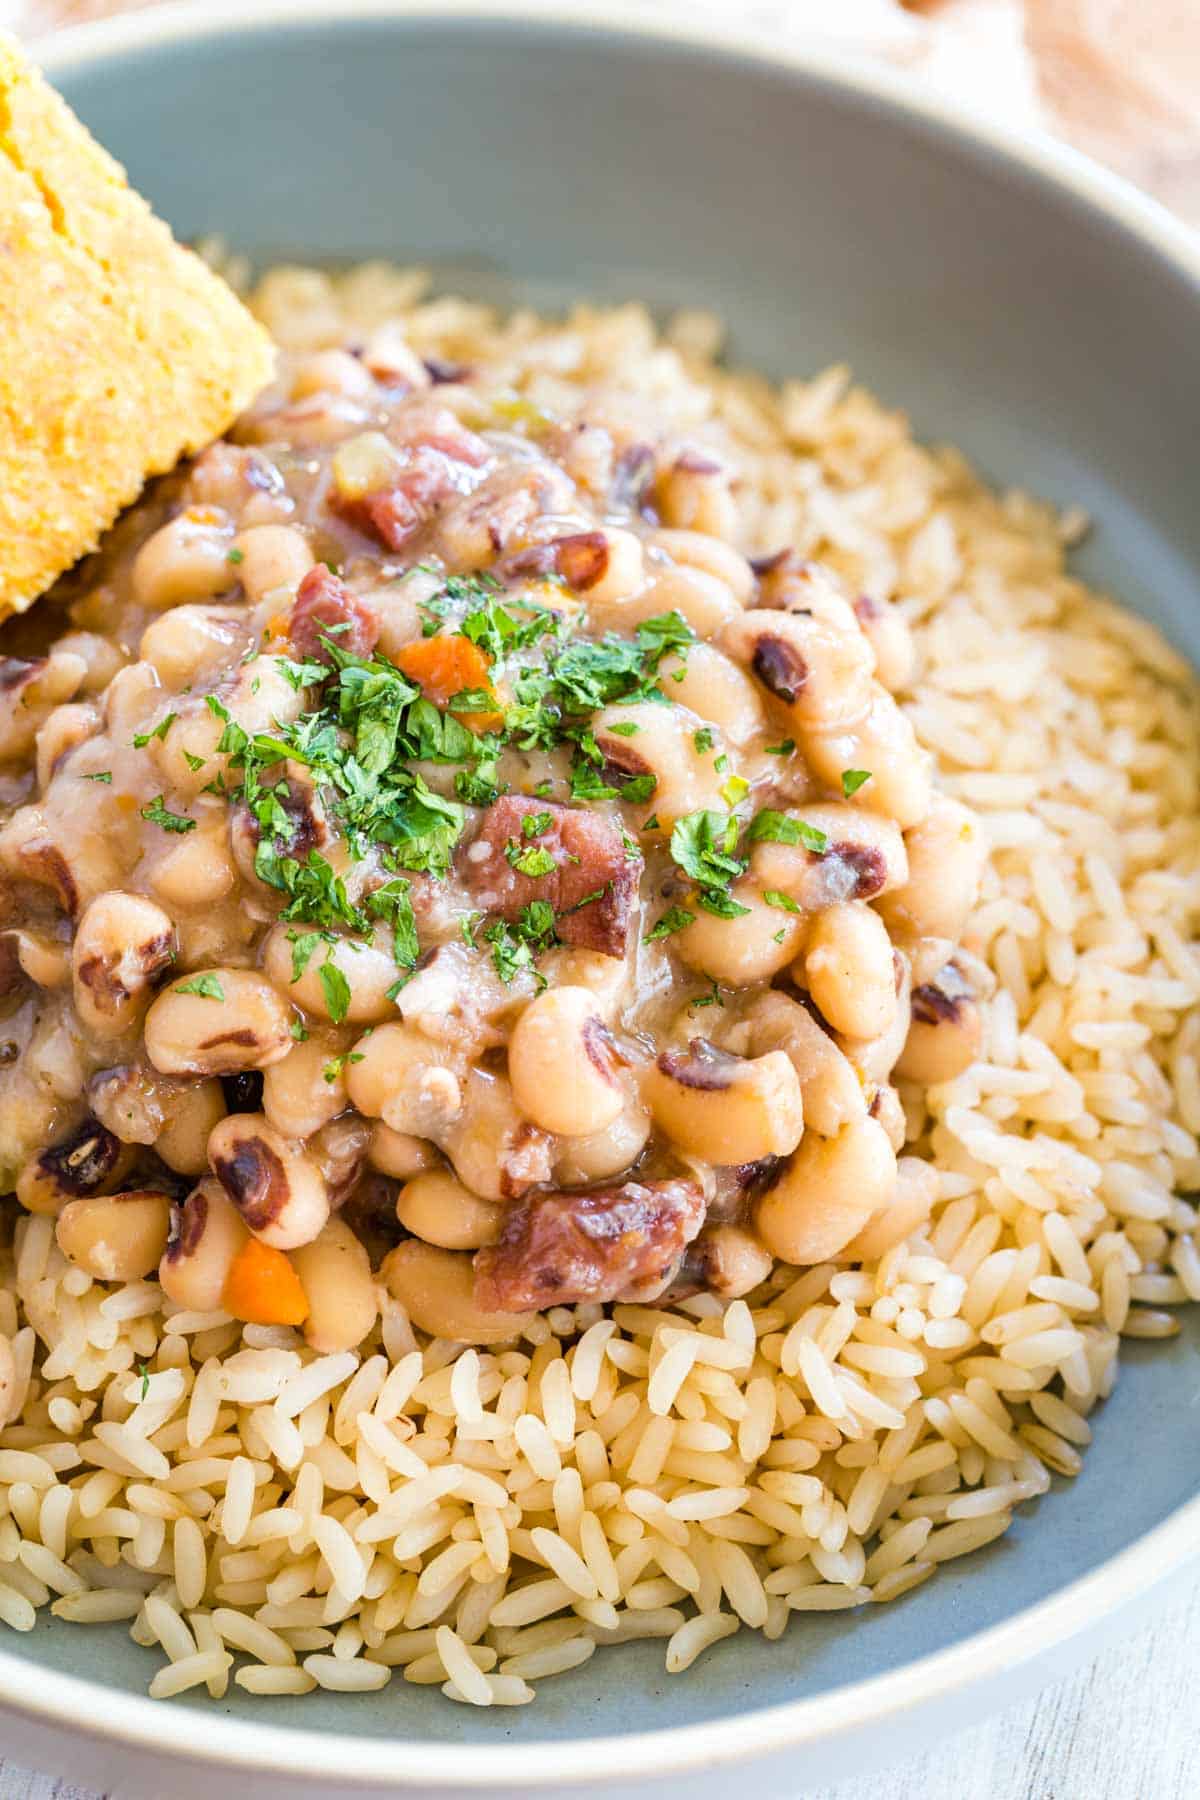 Black eyed peas served over rice, with a side of corn bread.